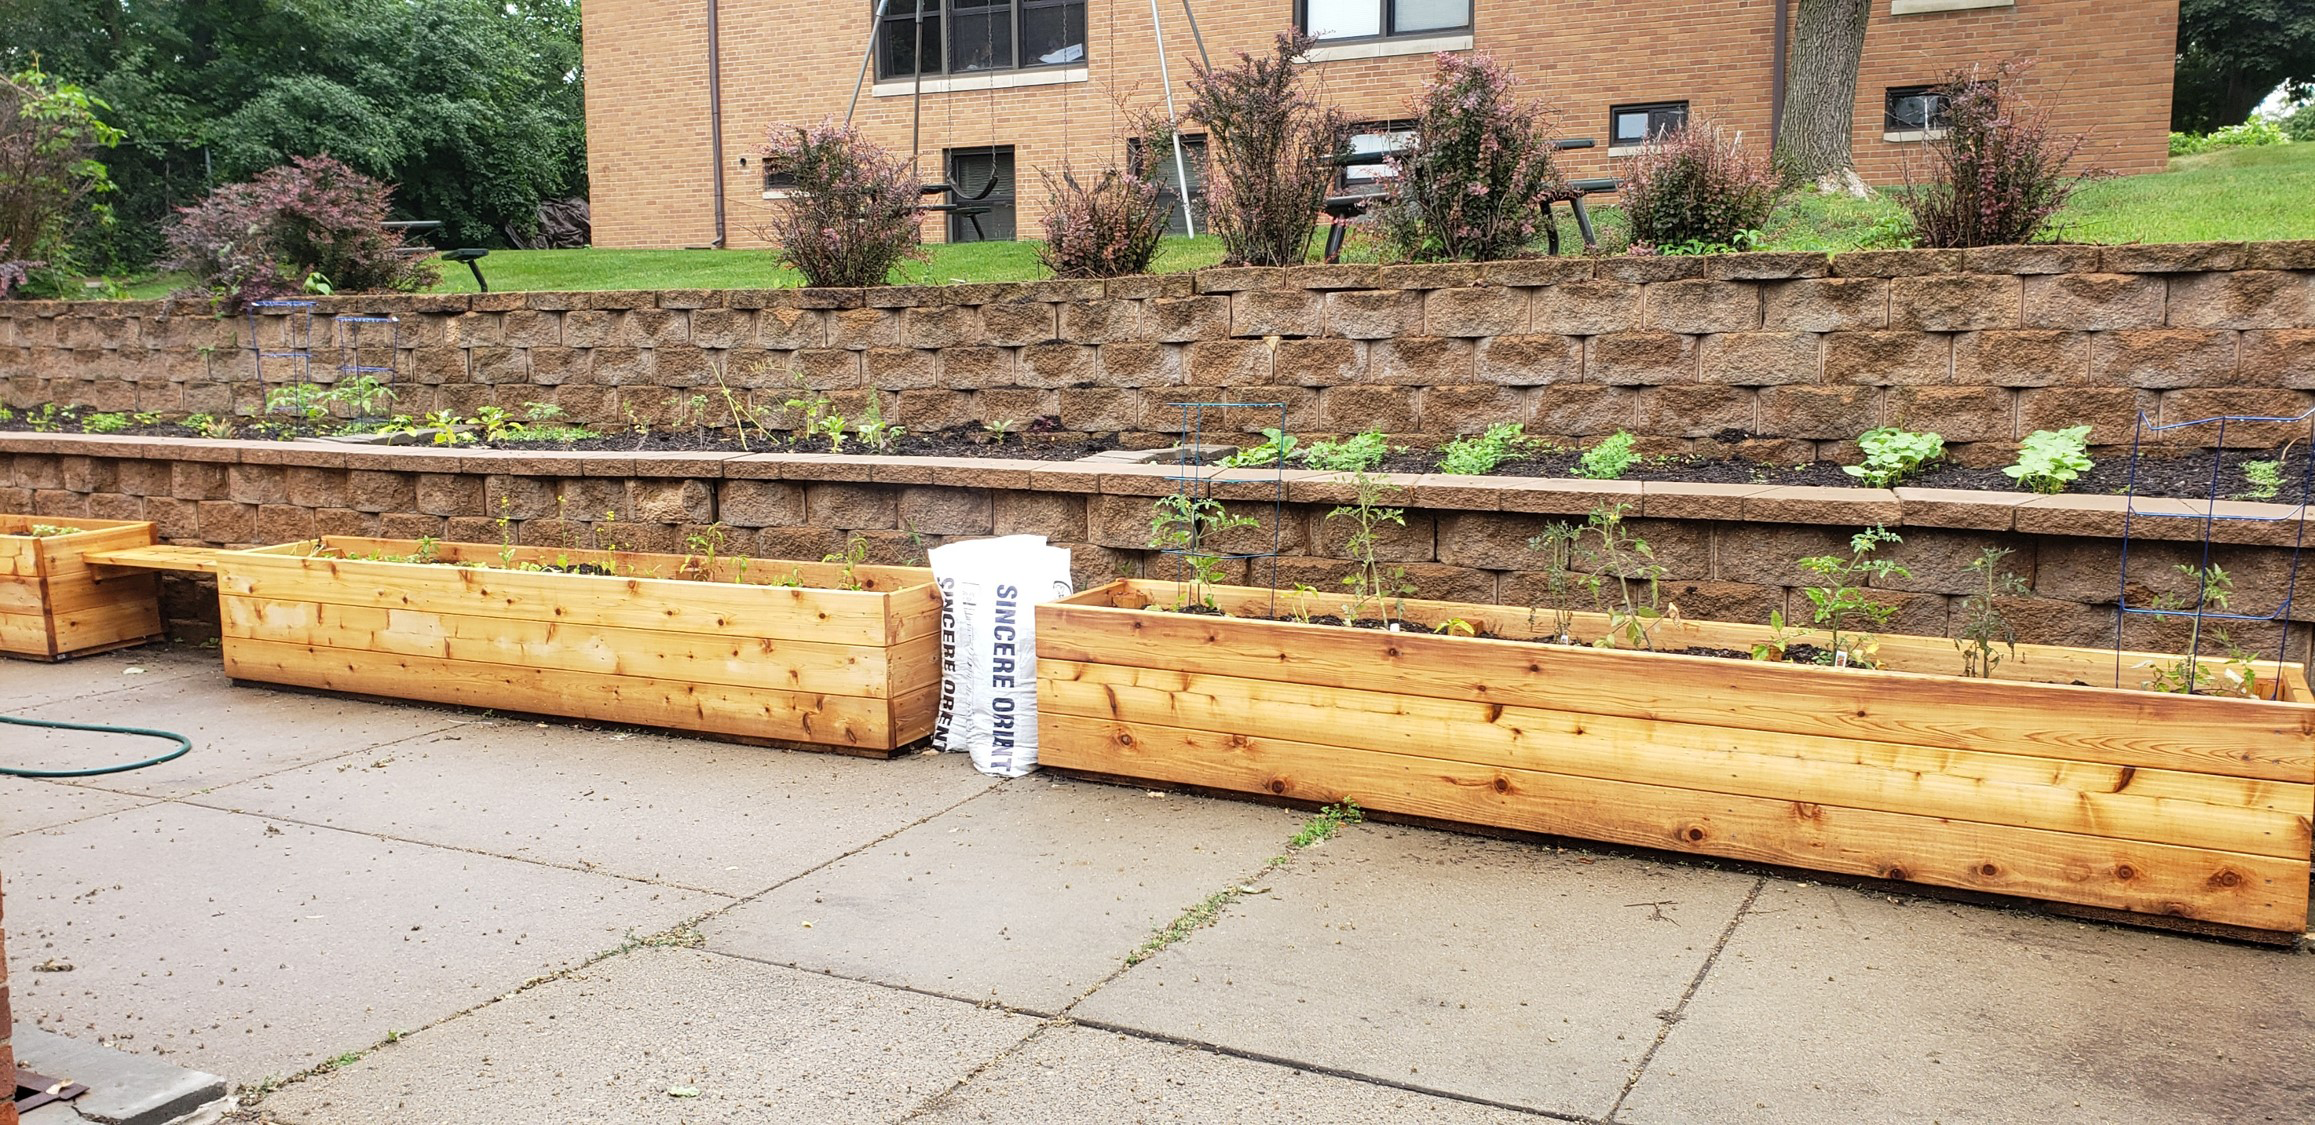 Garden boxes created by volunteers outside Wilder Center for Social Healing